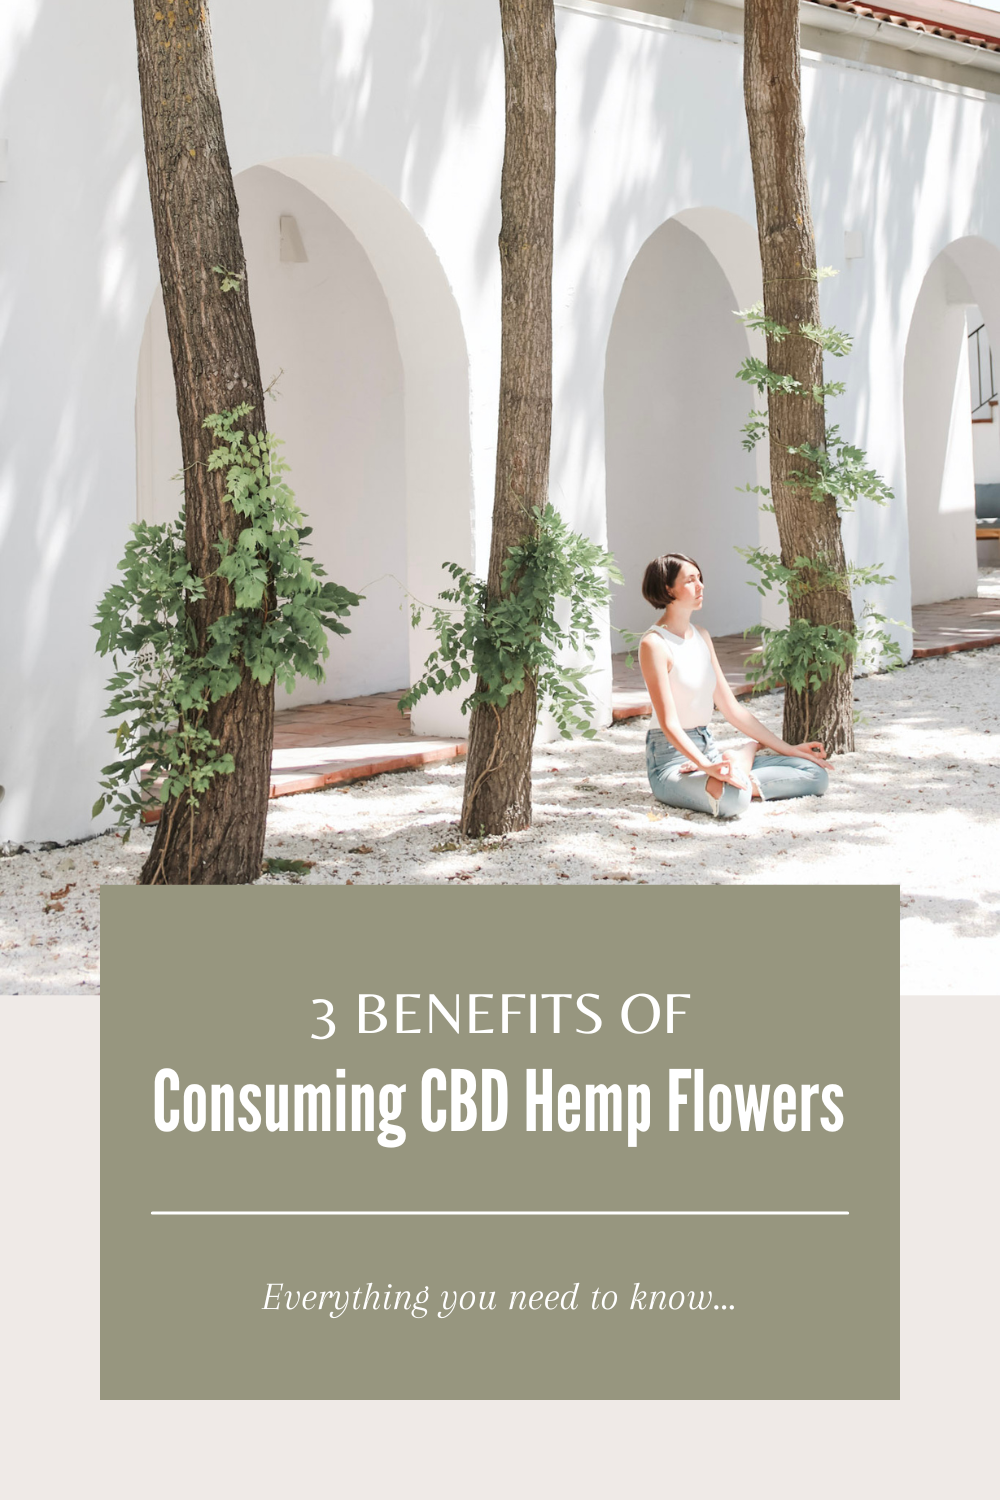 A beautiful courtyard with sand and trees. A woman sits in the sand meditating. This article covers benefits of consuming CBD hemp flowers.


Block them everywhere and be rid of them altogether. It's pretty simple. LOL. I don't know, it's not my business. I just think Brandi is very unstable and legitimately crazy. She seems to manipulate people who aren't so bright. Like Ashlea and Kaley. If it is out of sight, it's of mind but, if they think you are seeing their messages, they'll keep trying.